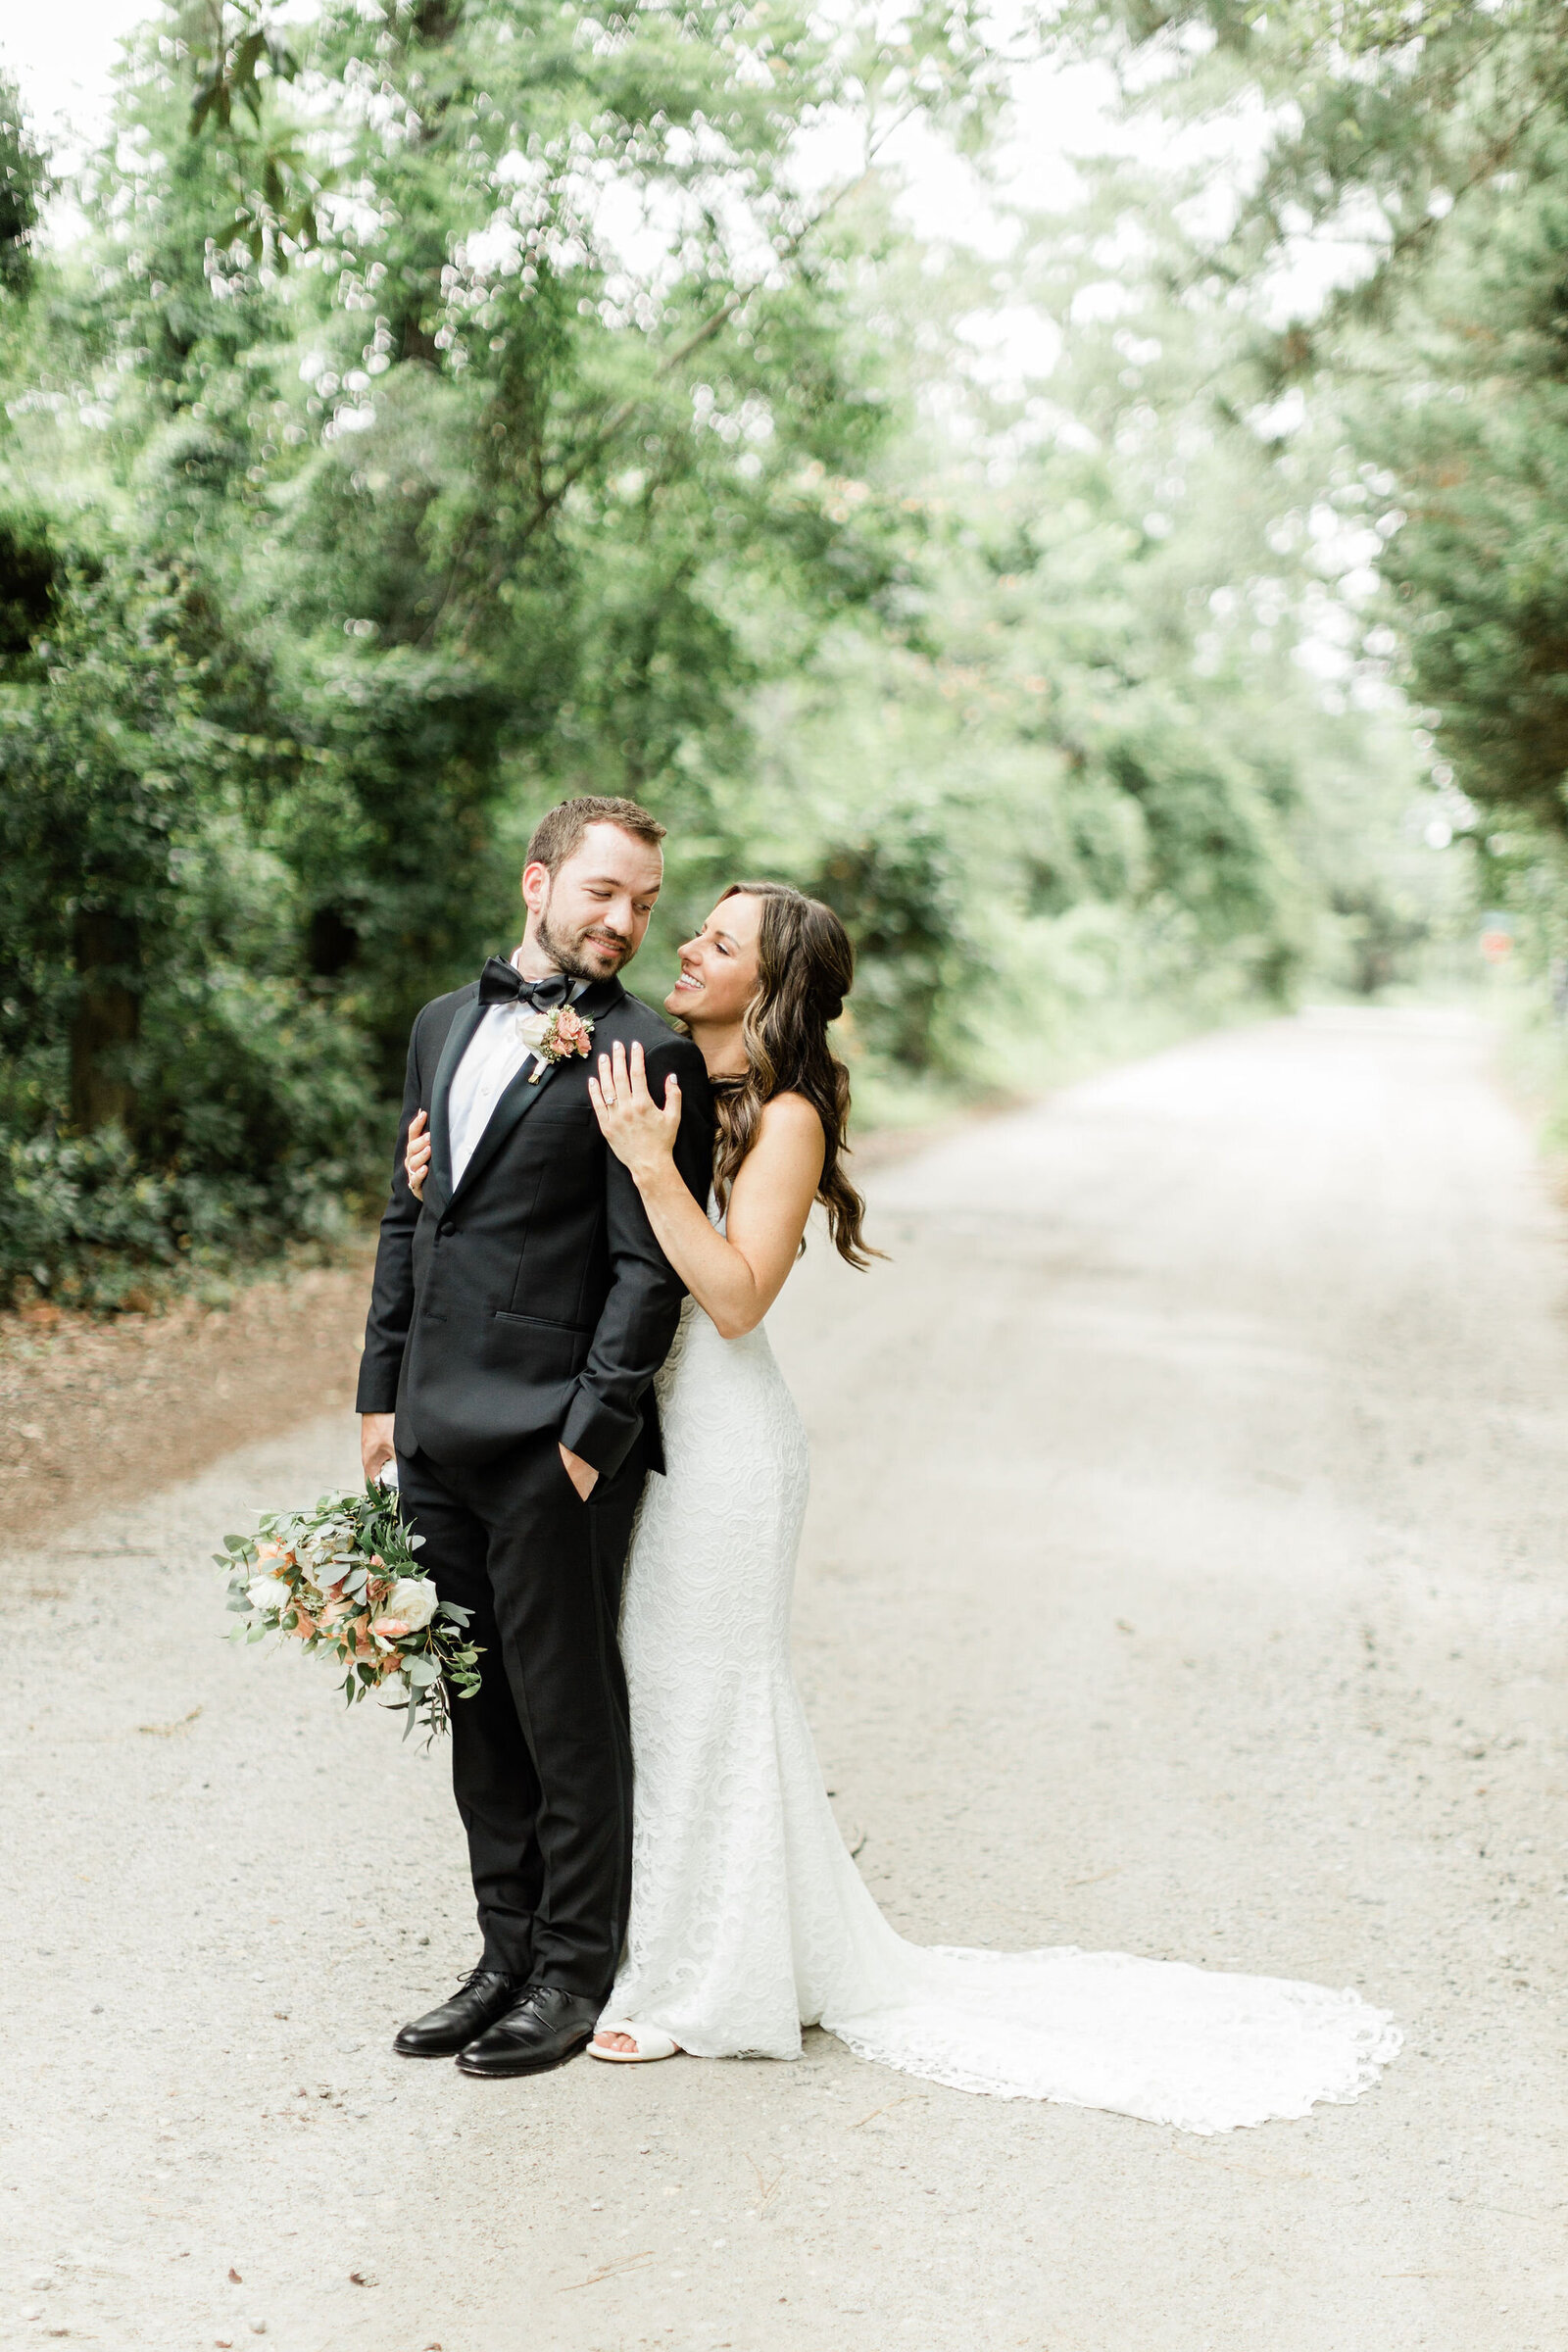 Wedding Photos on a Path | Wrightsville Manor, Wrightsville Beach NC | The Axtells Photo and Film